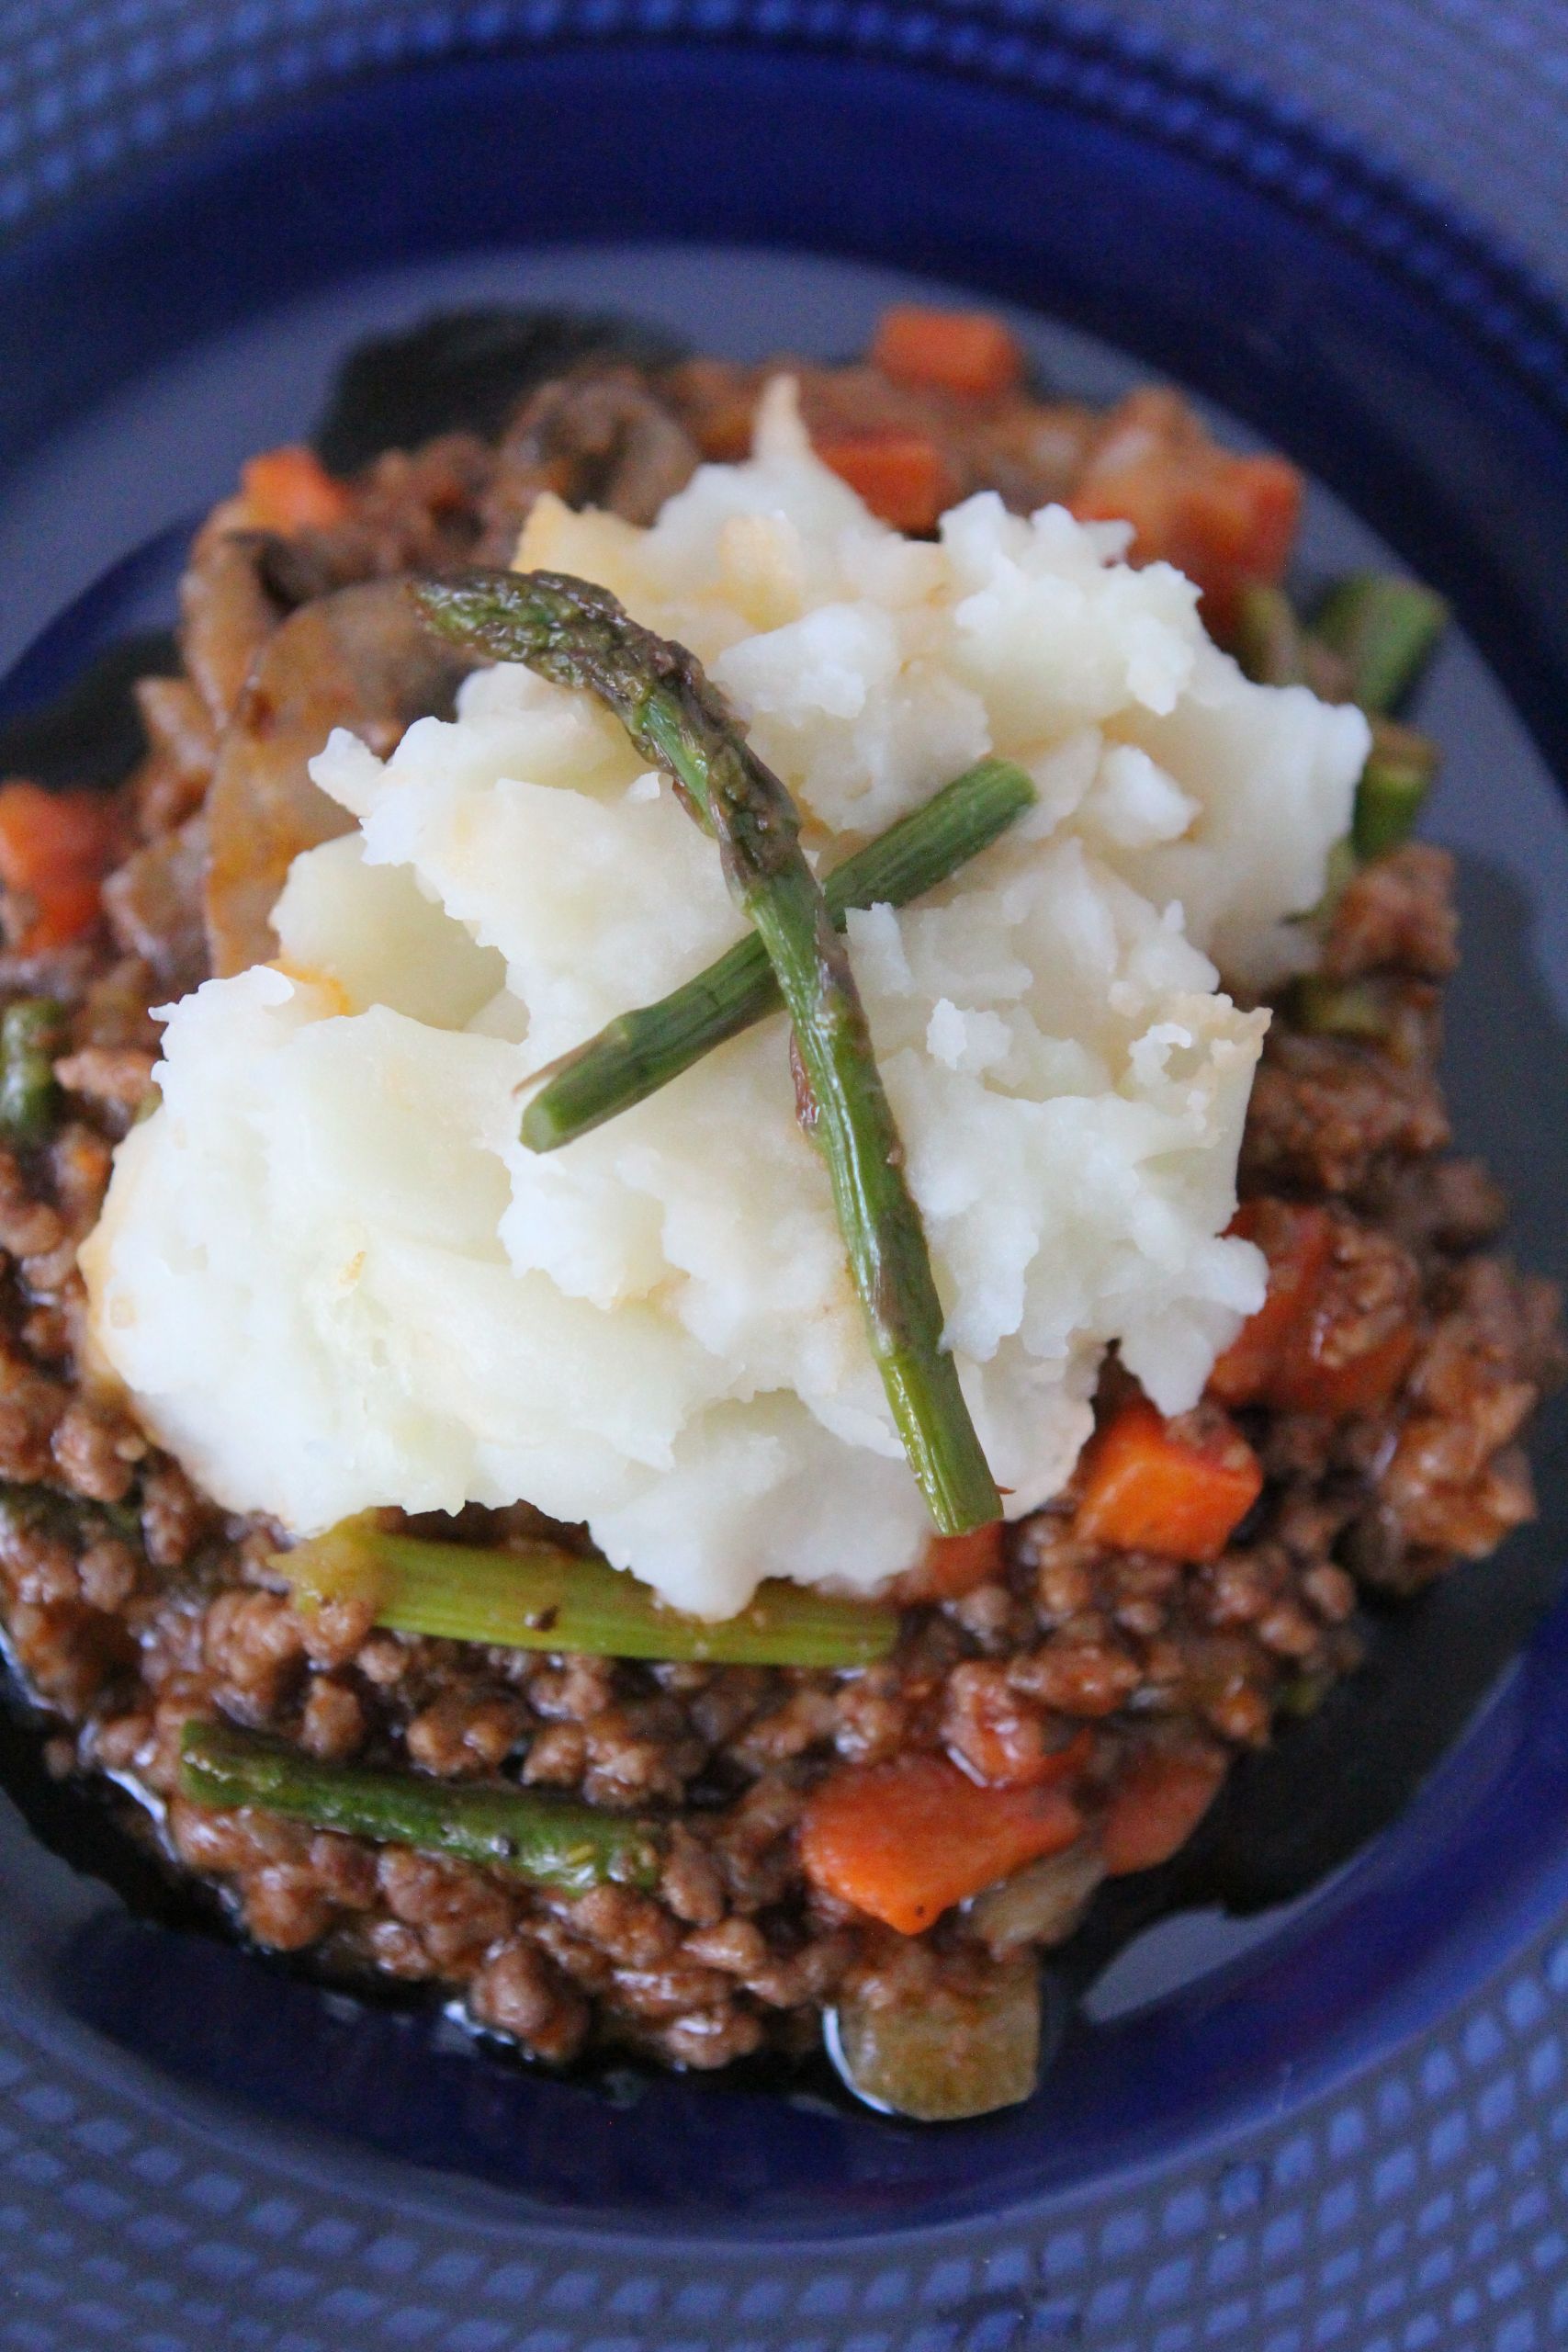 Recipes For Shepherd'S Pie With Ground Beef
 Not So Shepherd s Pie The Whole Smiths